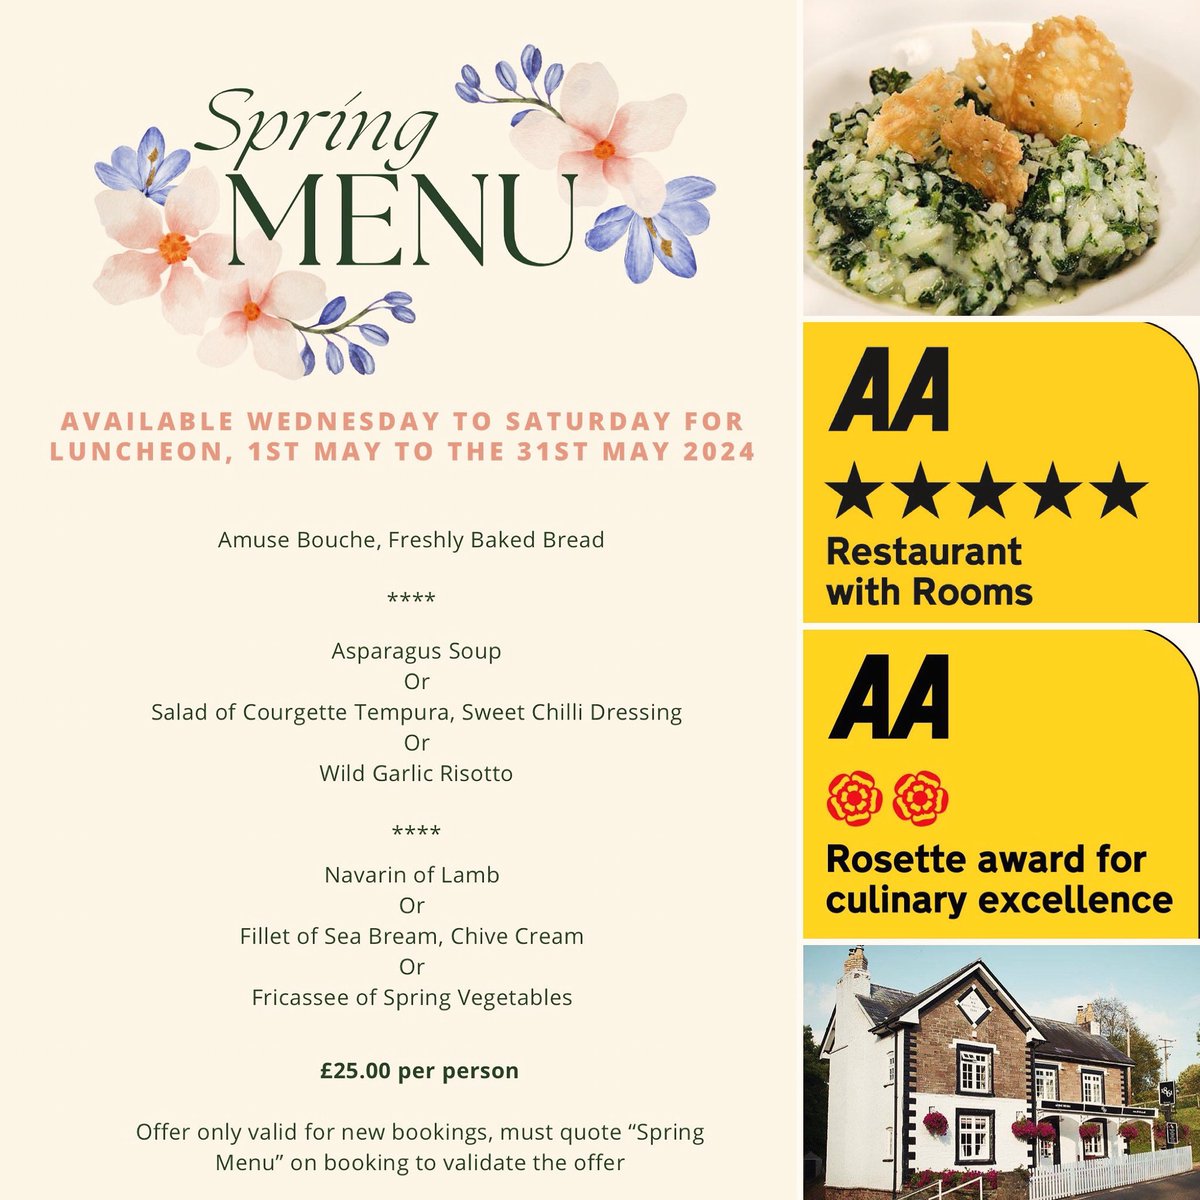 Enjoy our fresh, delicious Spring Menu for a lunch in the countryside. Two courses for £25 available until May 31st 👉 18-61.co.uk/dine/

#Saturdays #may #foodie #Wales